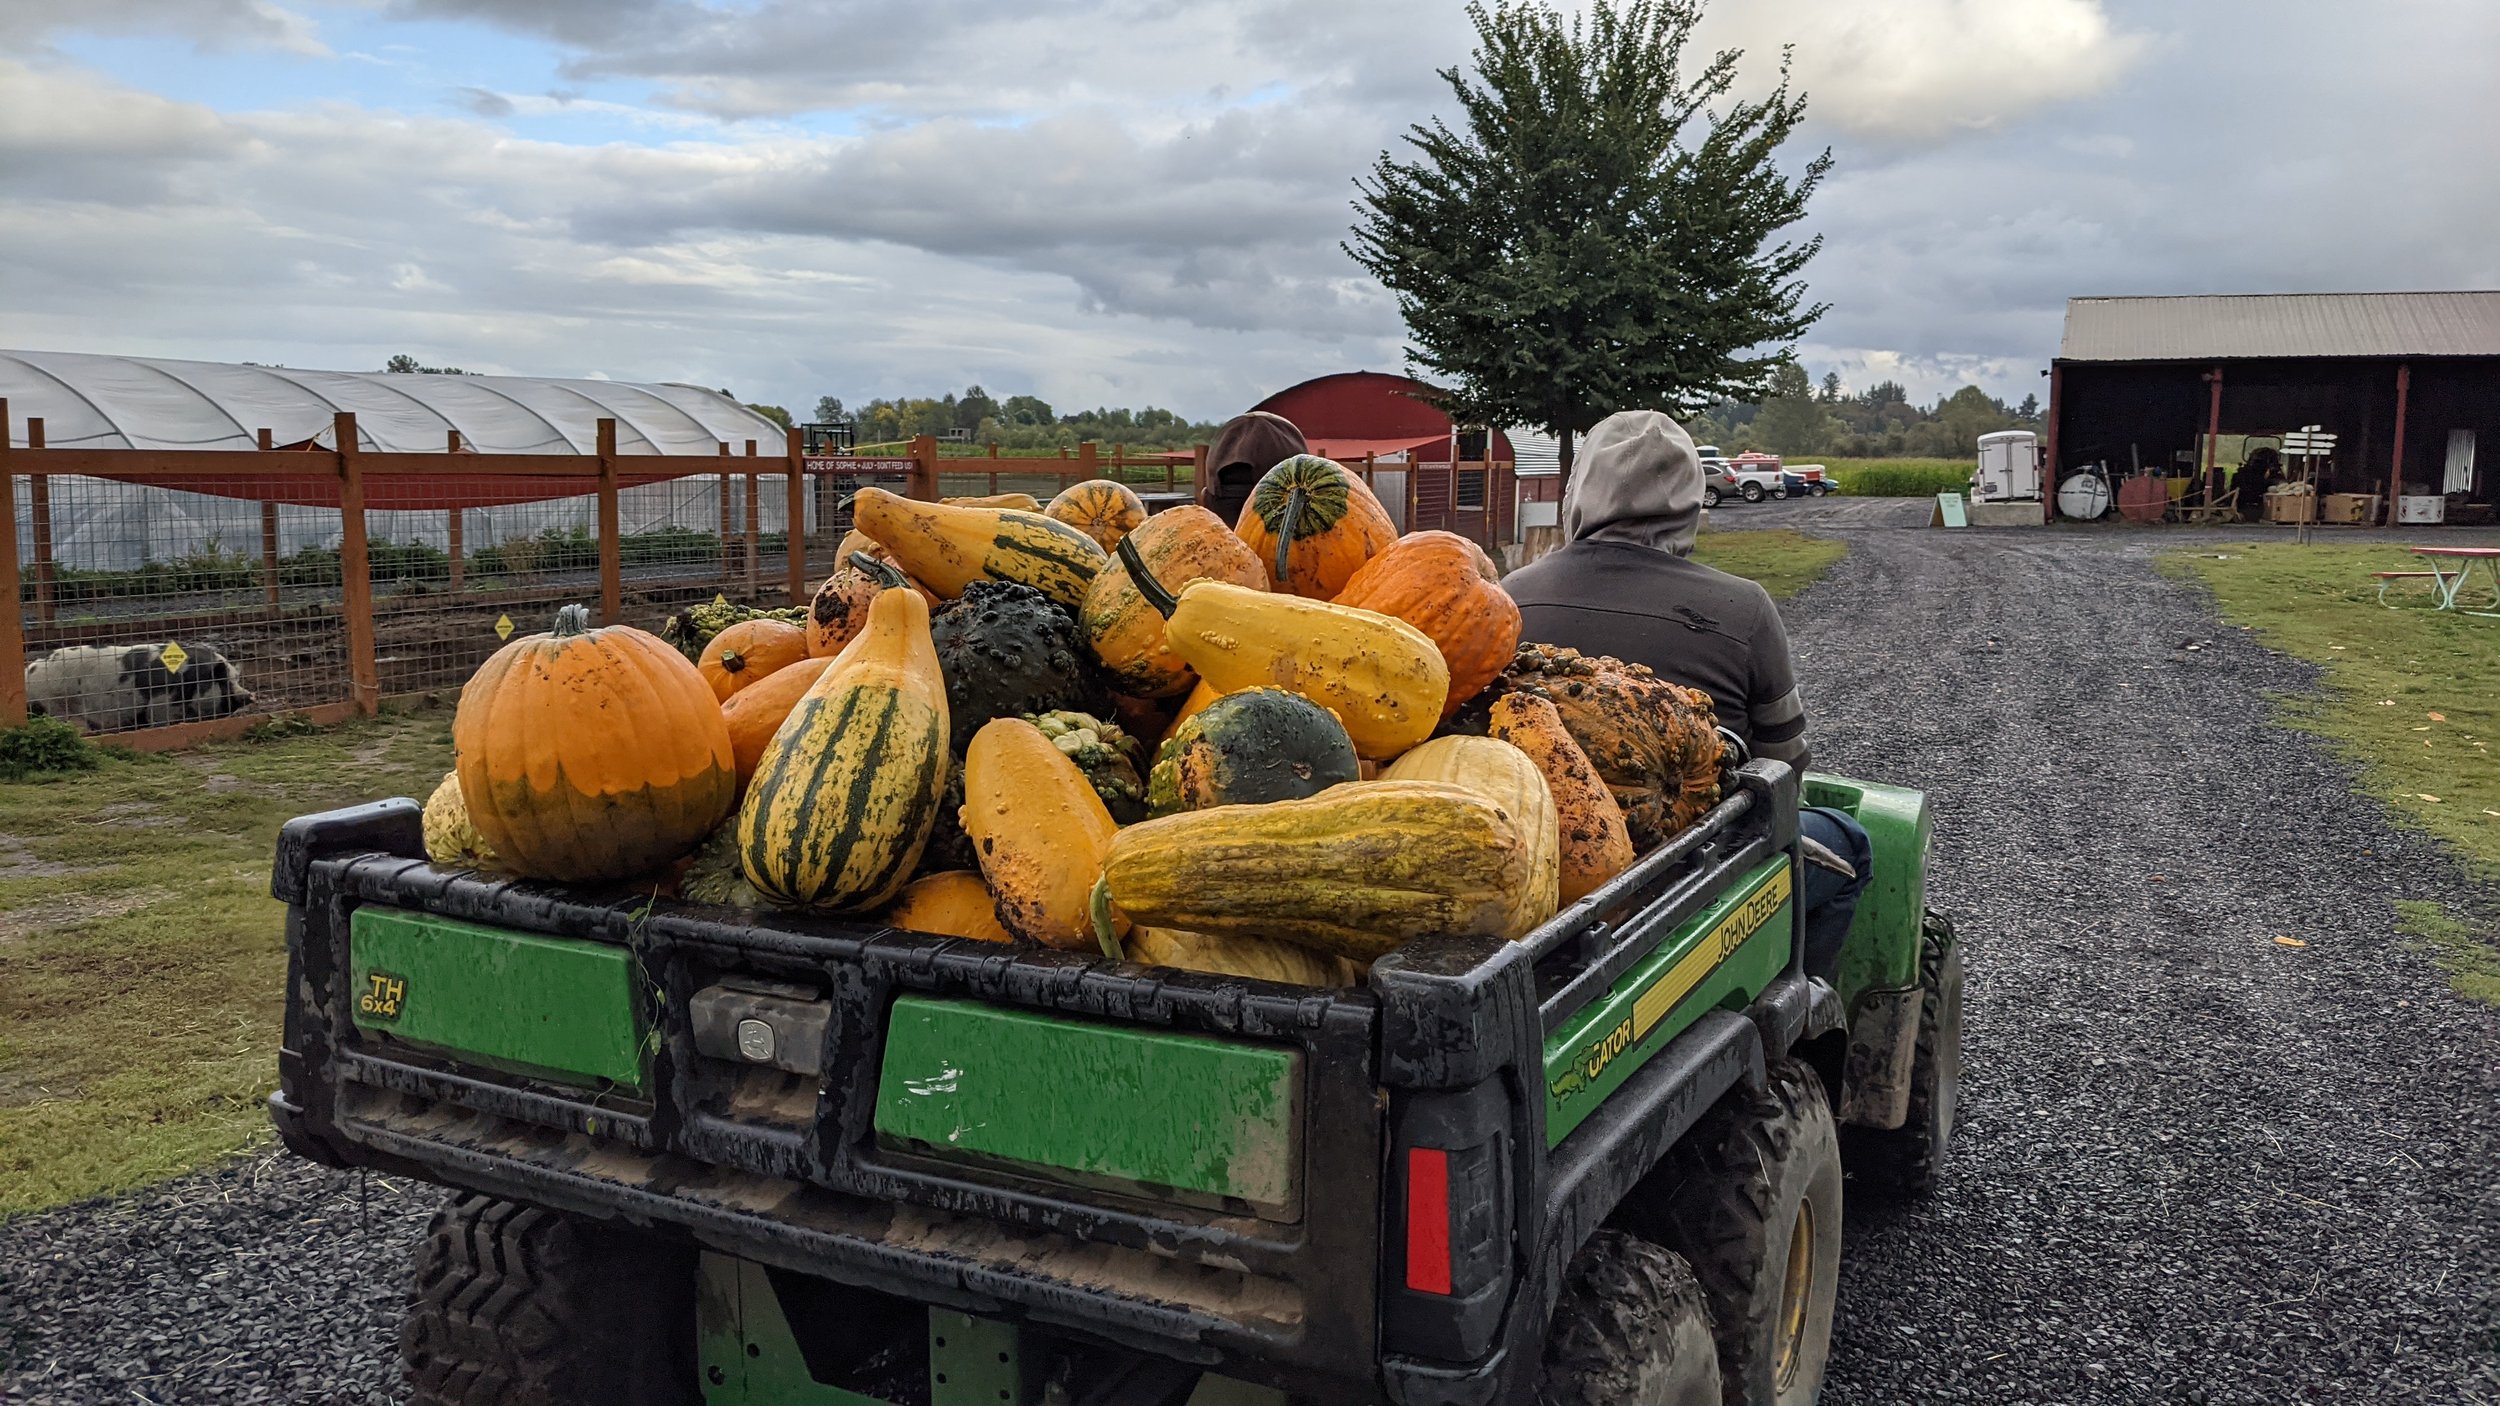  So proud of how our pumpkins and gourds grew this year. We added molasses to the irrigation system when we watered them. Not only did the farm smell great, but it prevented powdery mildew and gave them a shot of sugar.  